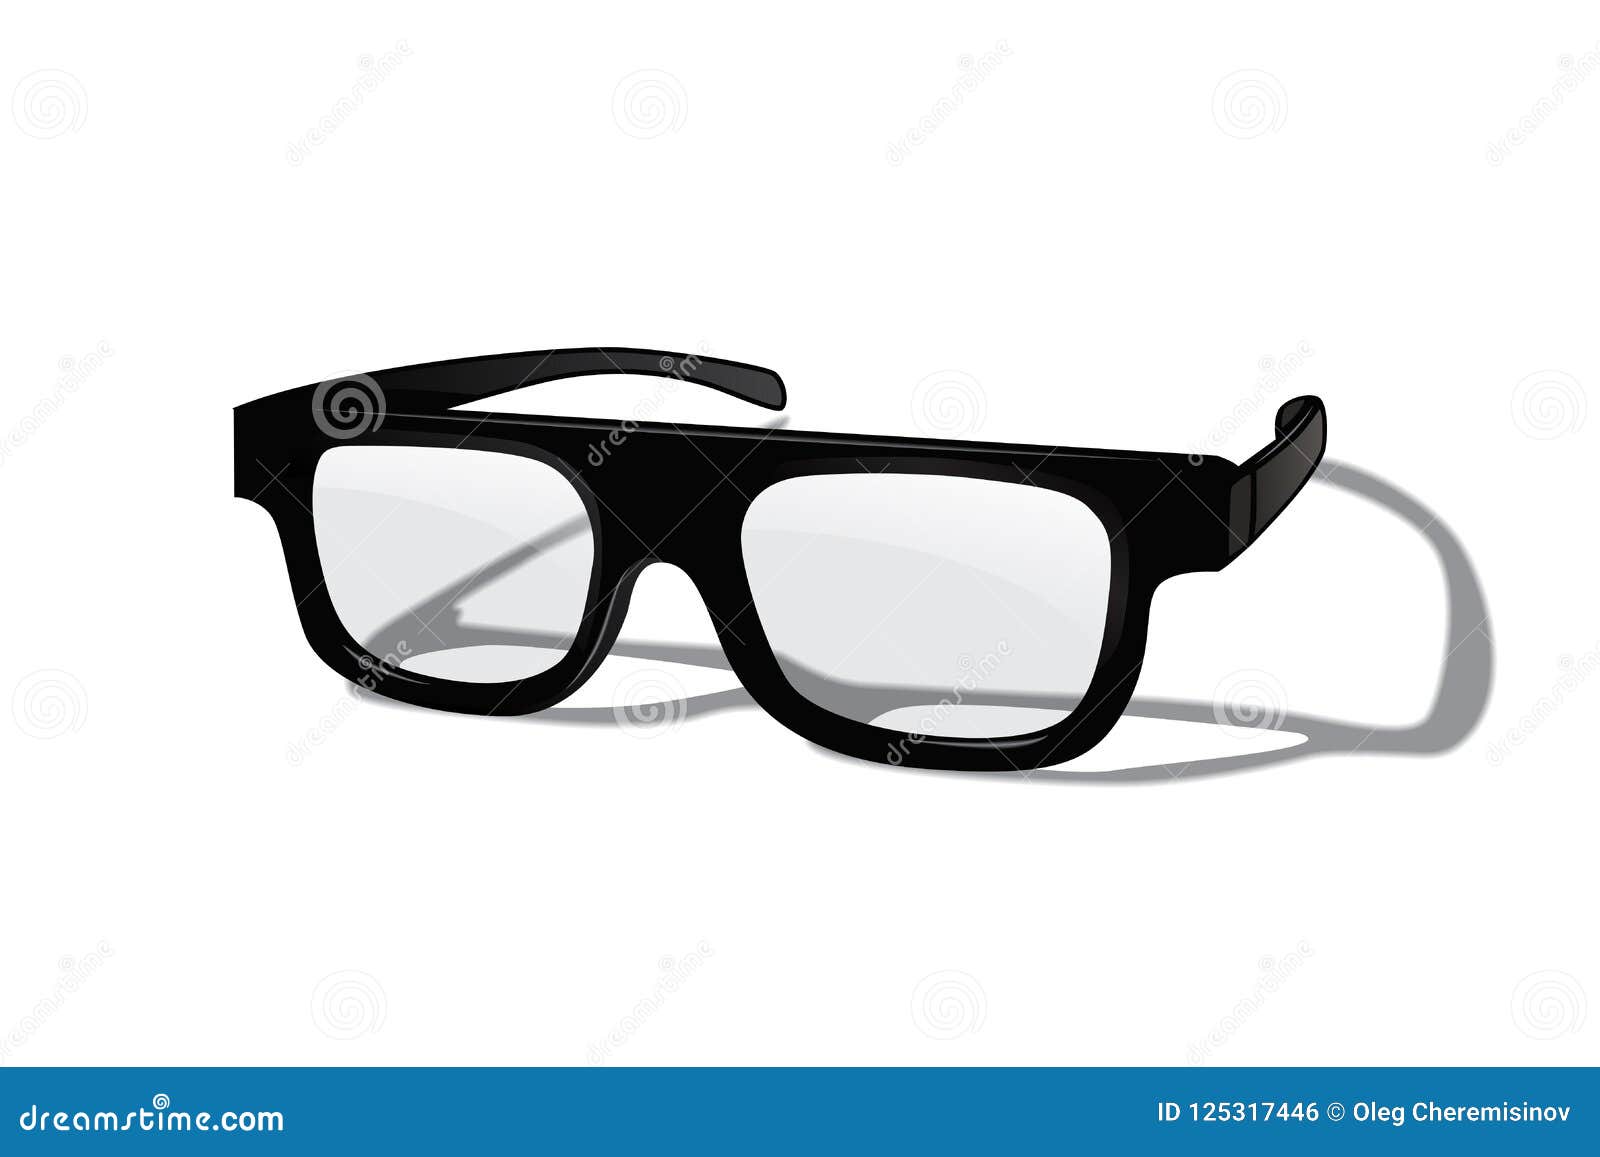 Glasses Isolated on White Background. Vector Realistic Design Element ...